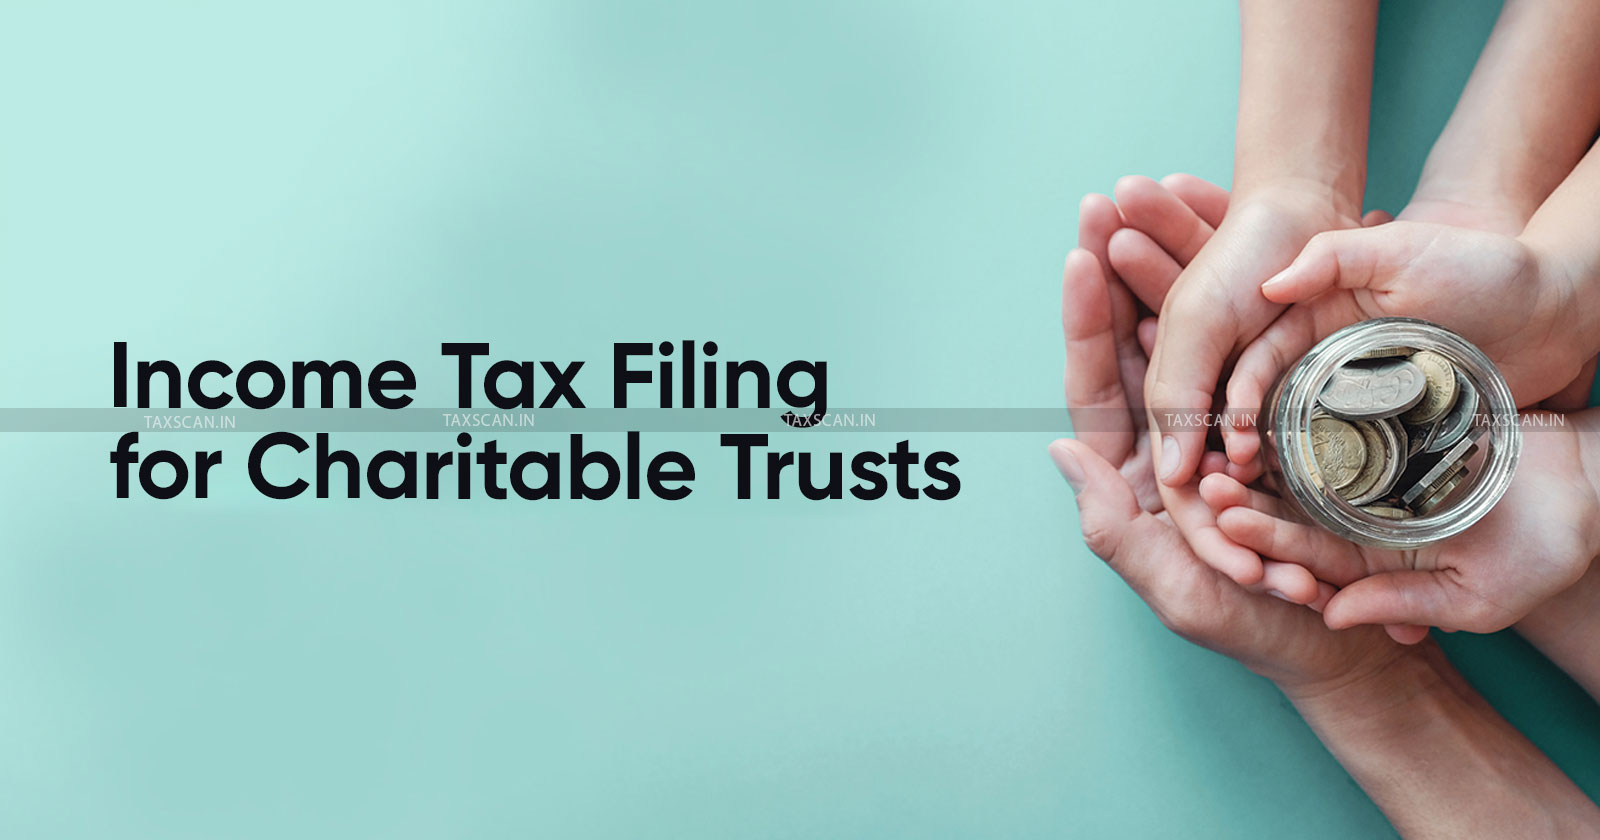 ITAT - ITAT mumbai - Tax Exemption for Charitable Trusts - Rent and Salary Payment - Salary Payment by Trust - taxscan